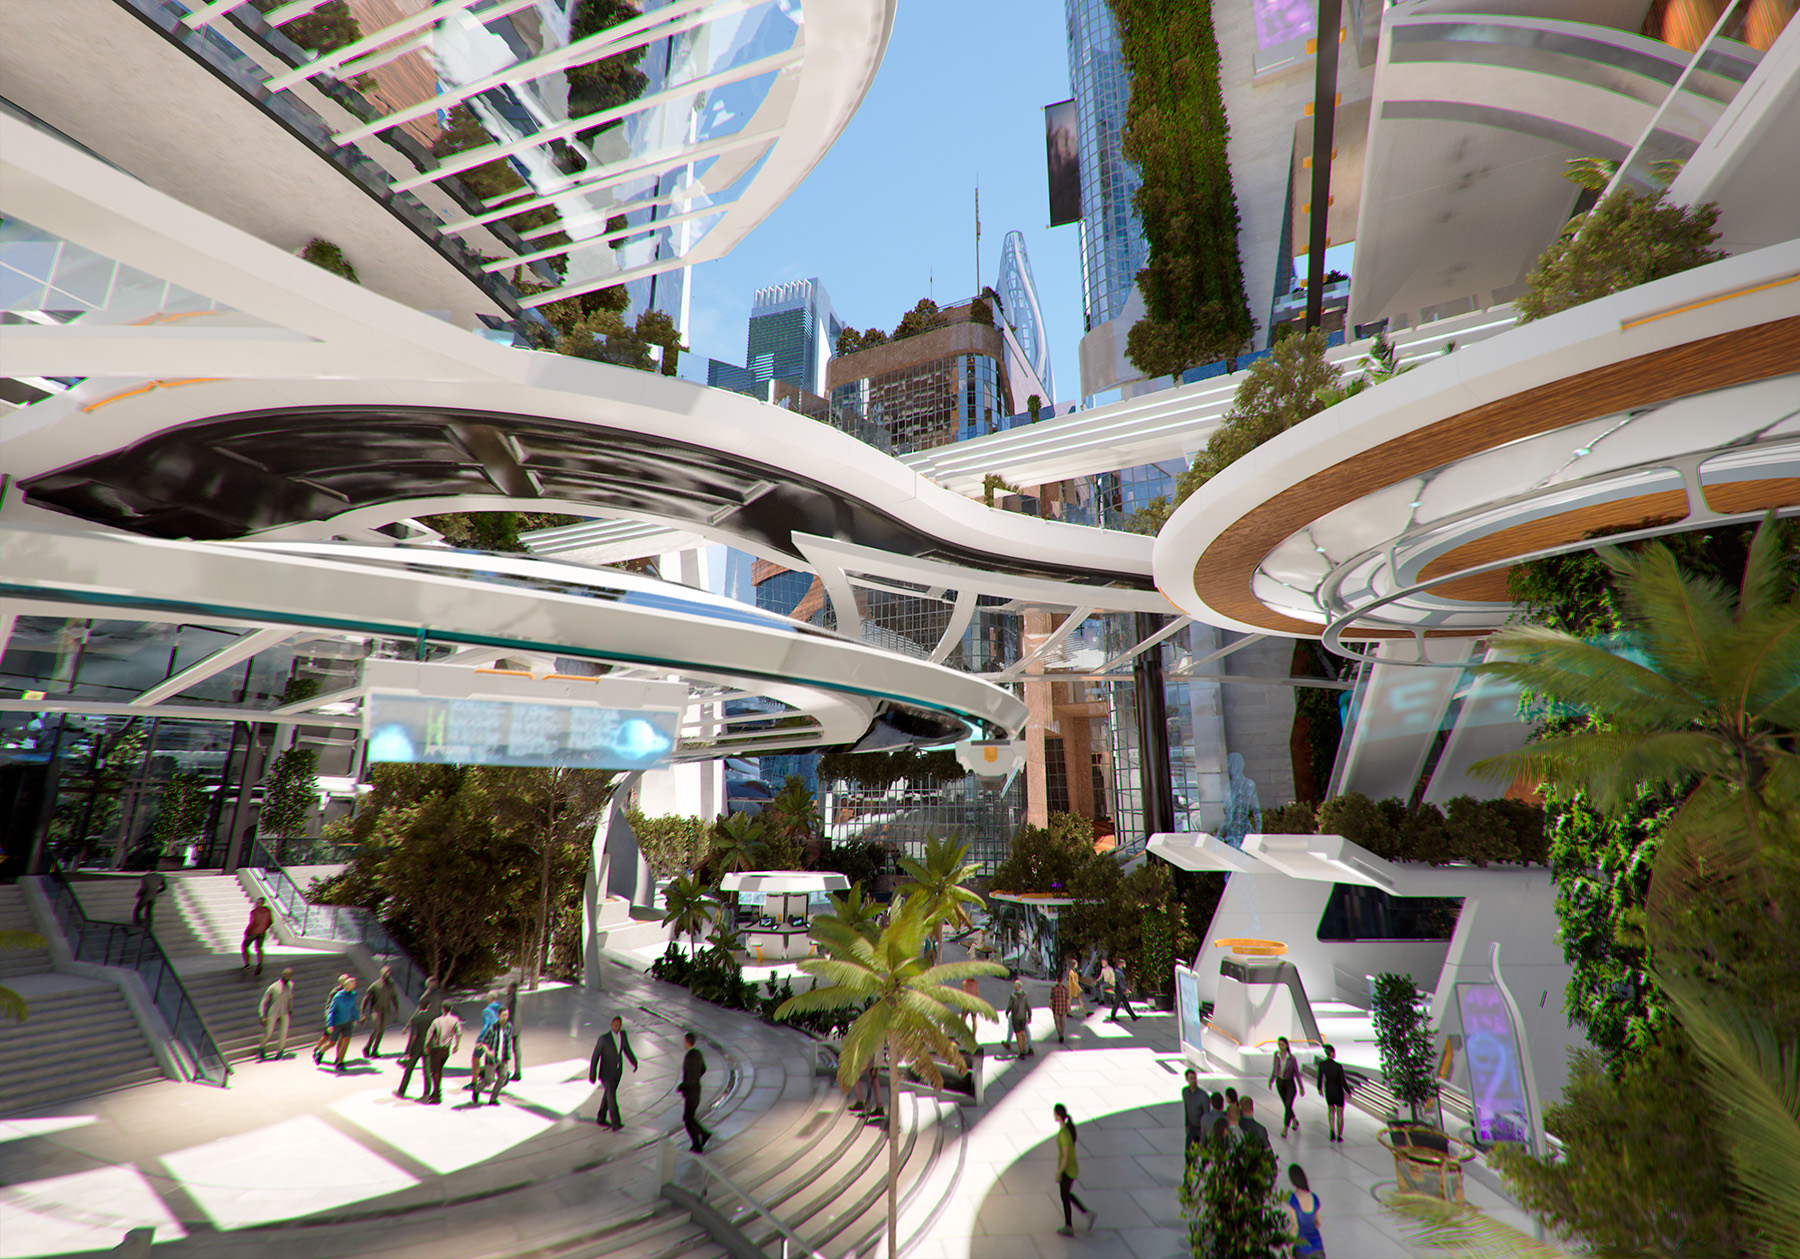 The city of the future is depicted as a place filled with natural light and clean air. 